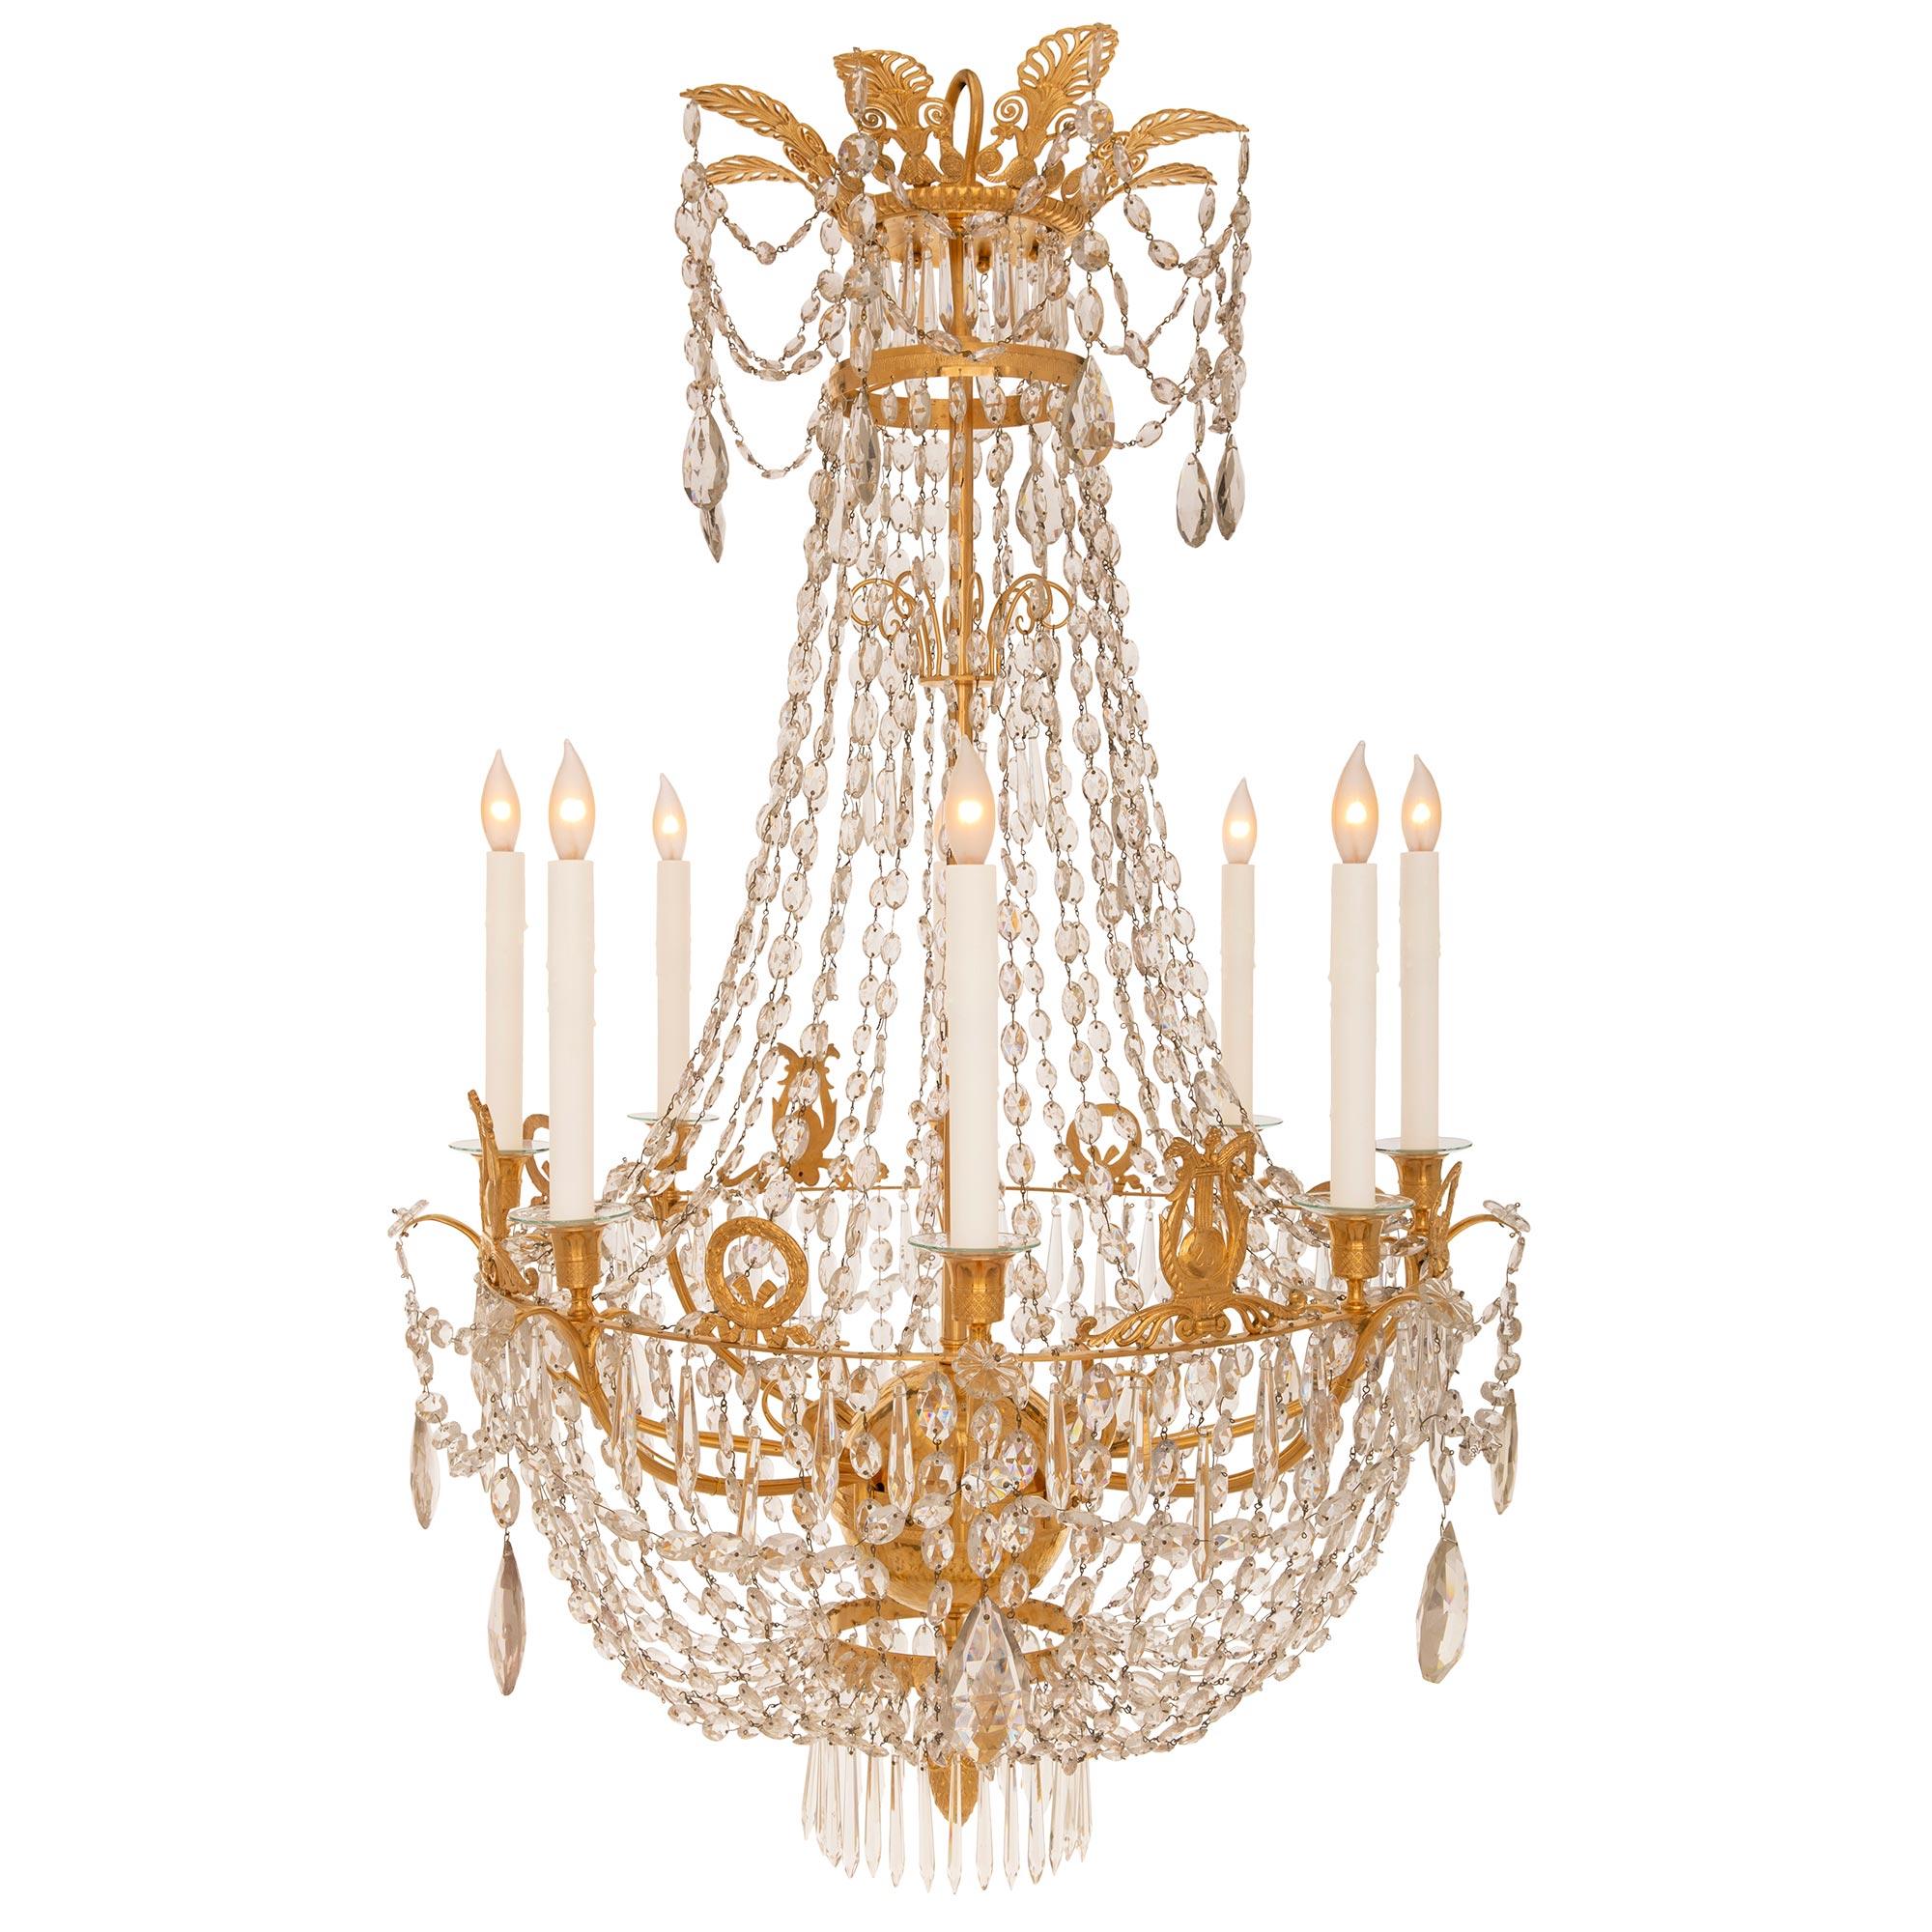 An exceptional French 19th century Neo-Classical st. Baccarat crystal and ormolu chandelier. The eight arm chandelier is centered by a fine bottom acorn finial amidst a lovely array of prism shaped cut crystal pendants. Elegant swaging cut crystal